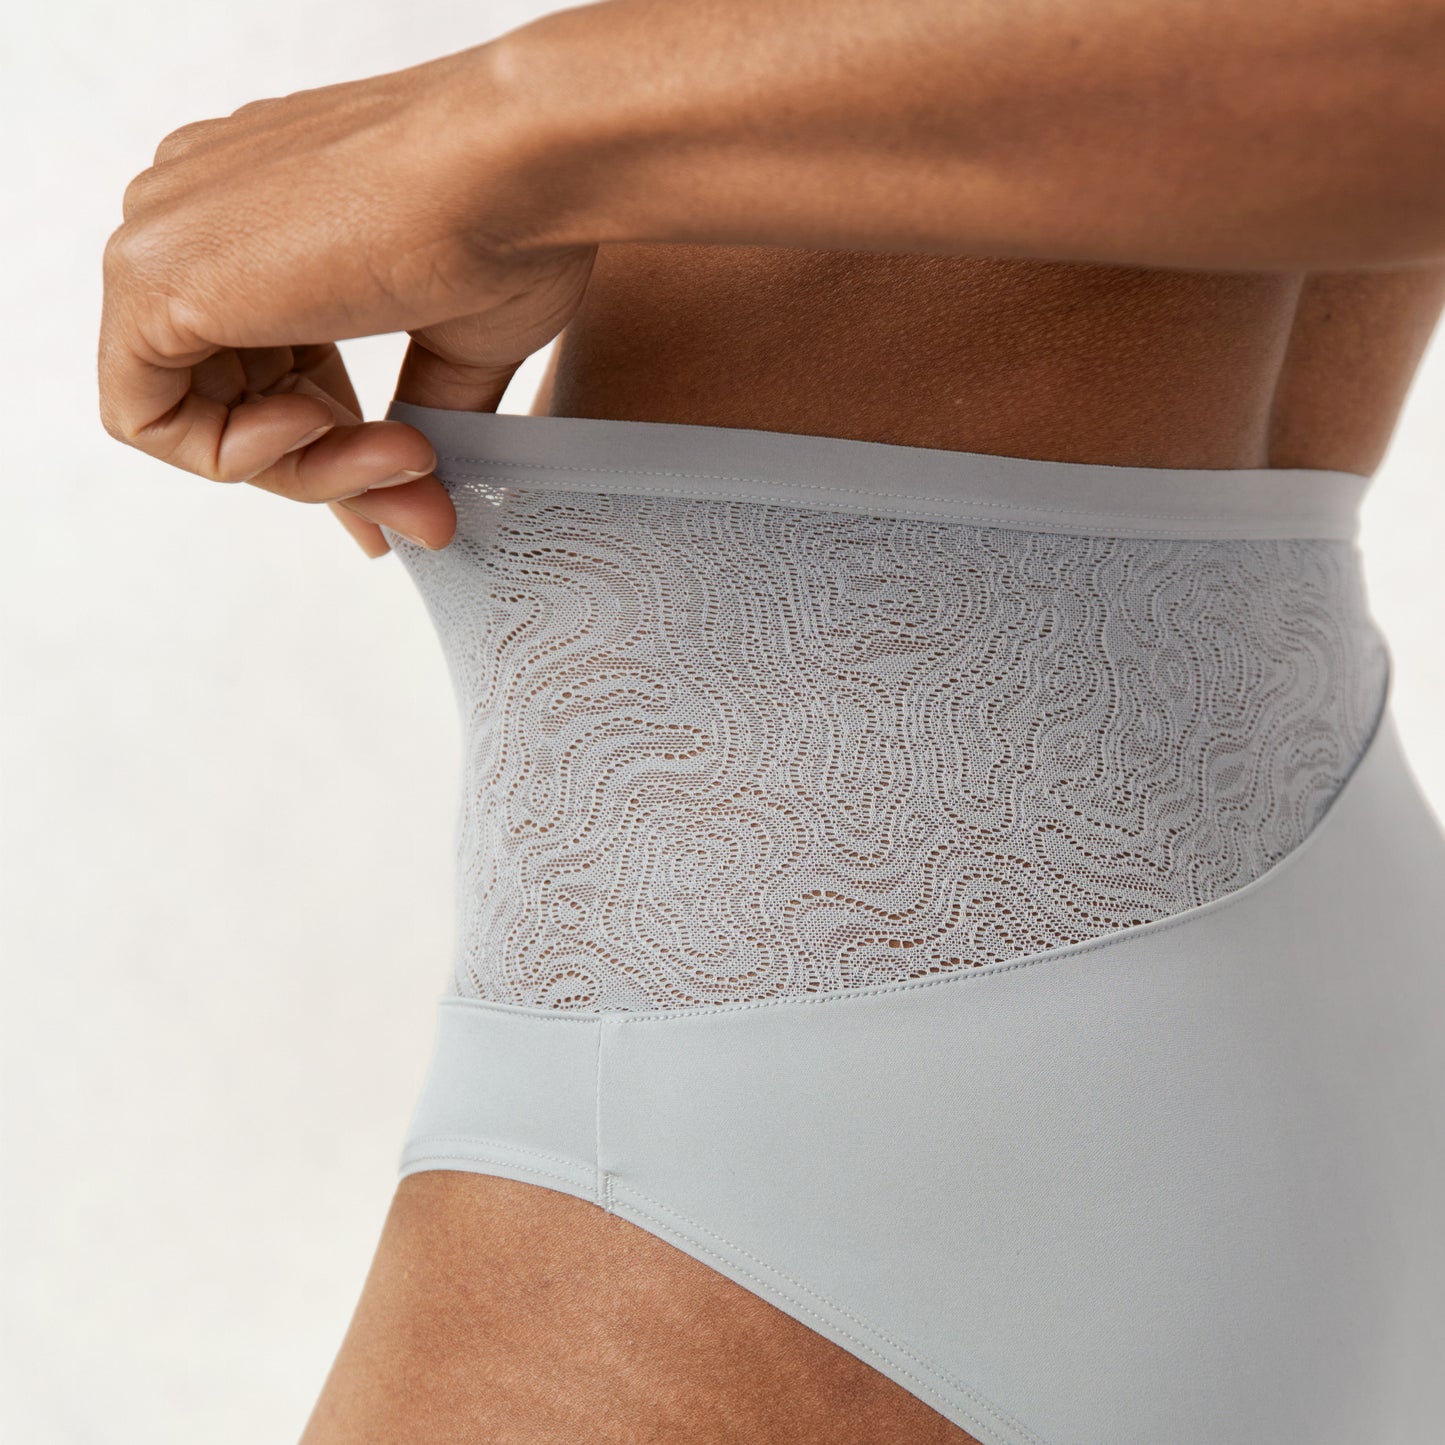 Proof Period & Leakproof High-Waisted Smoothing Briefs: Lightest